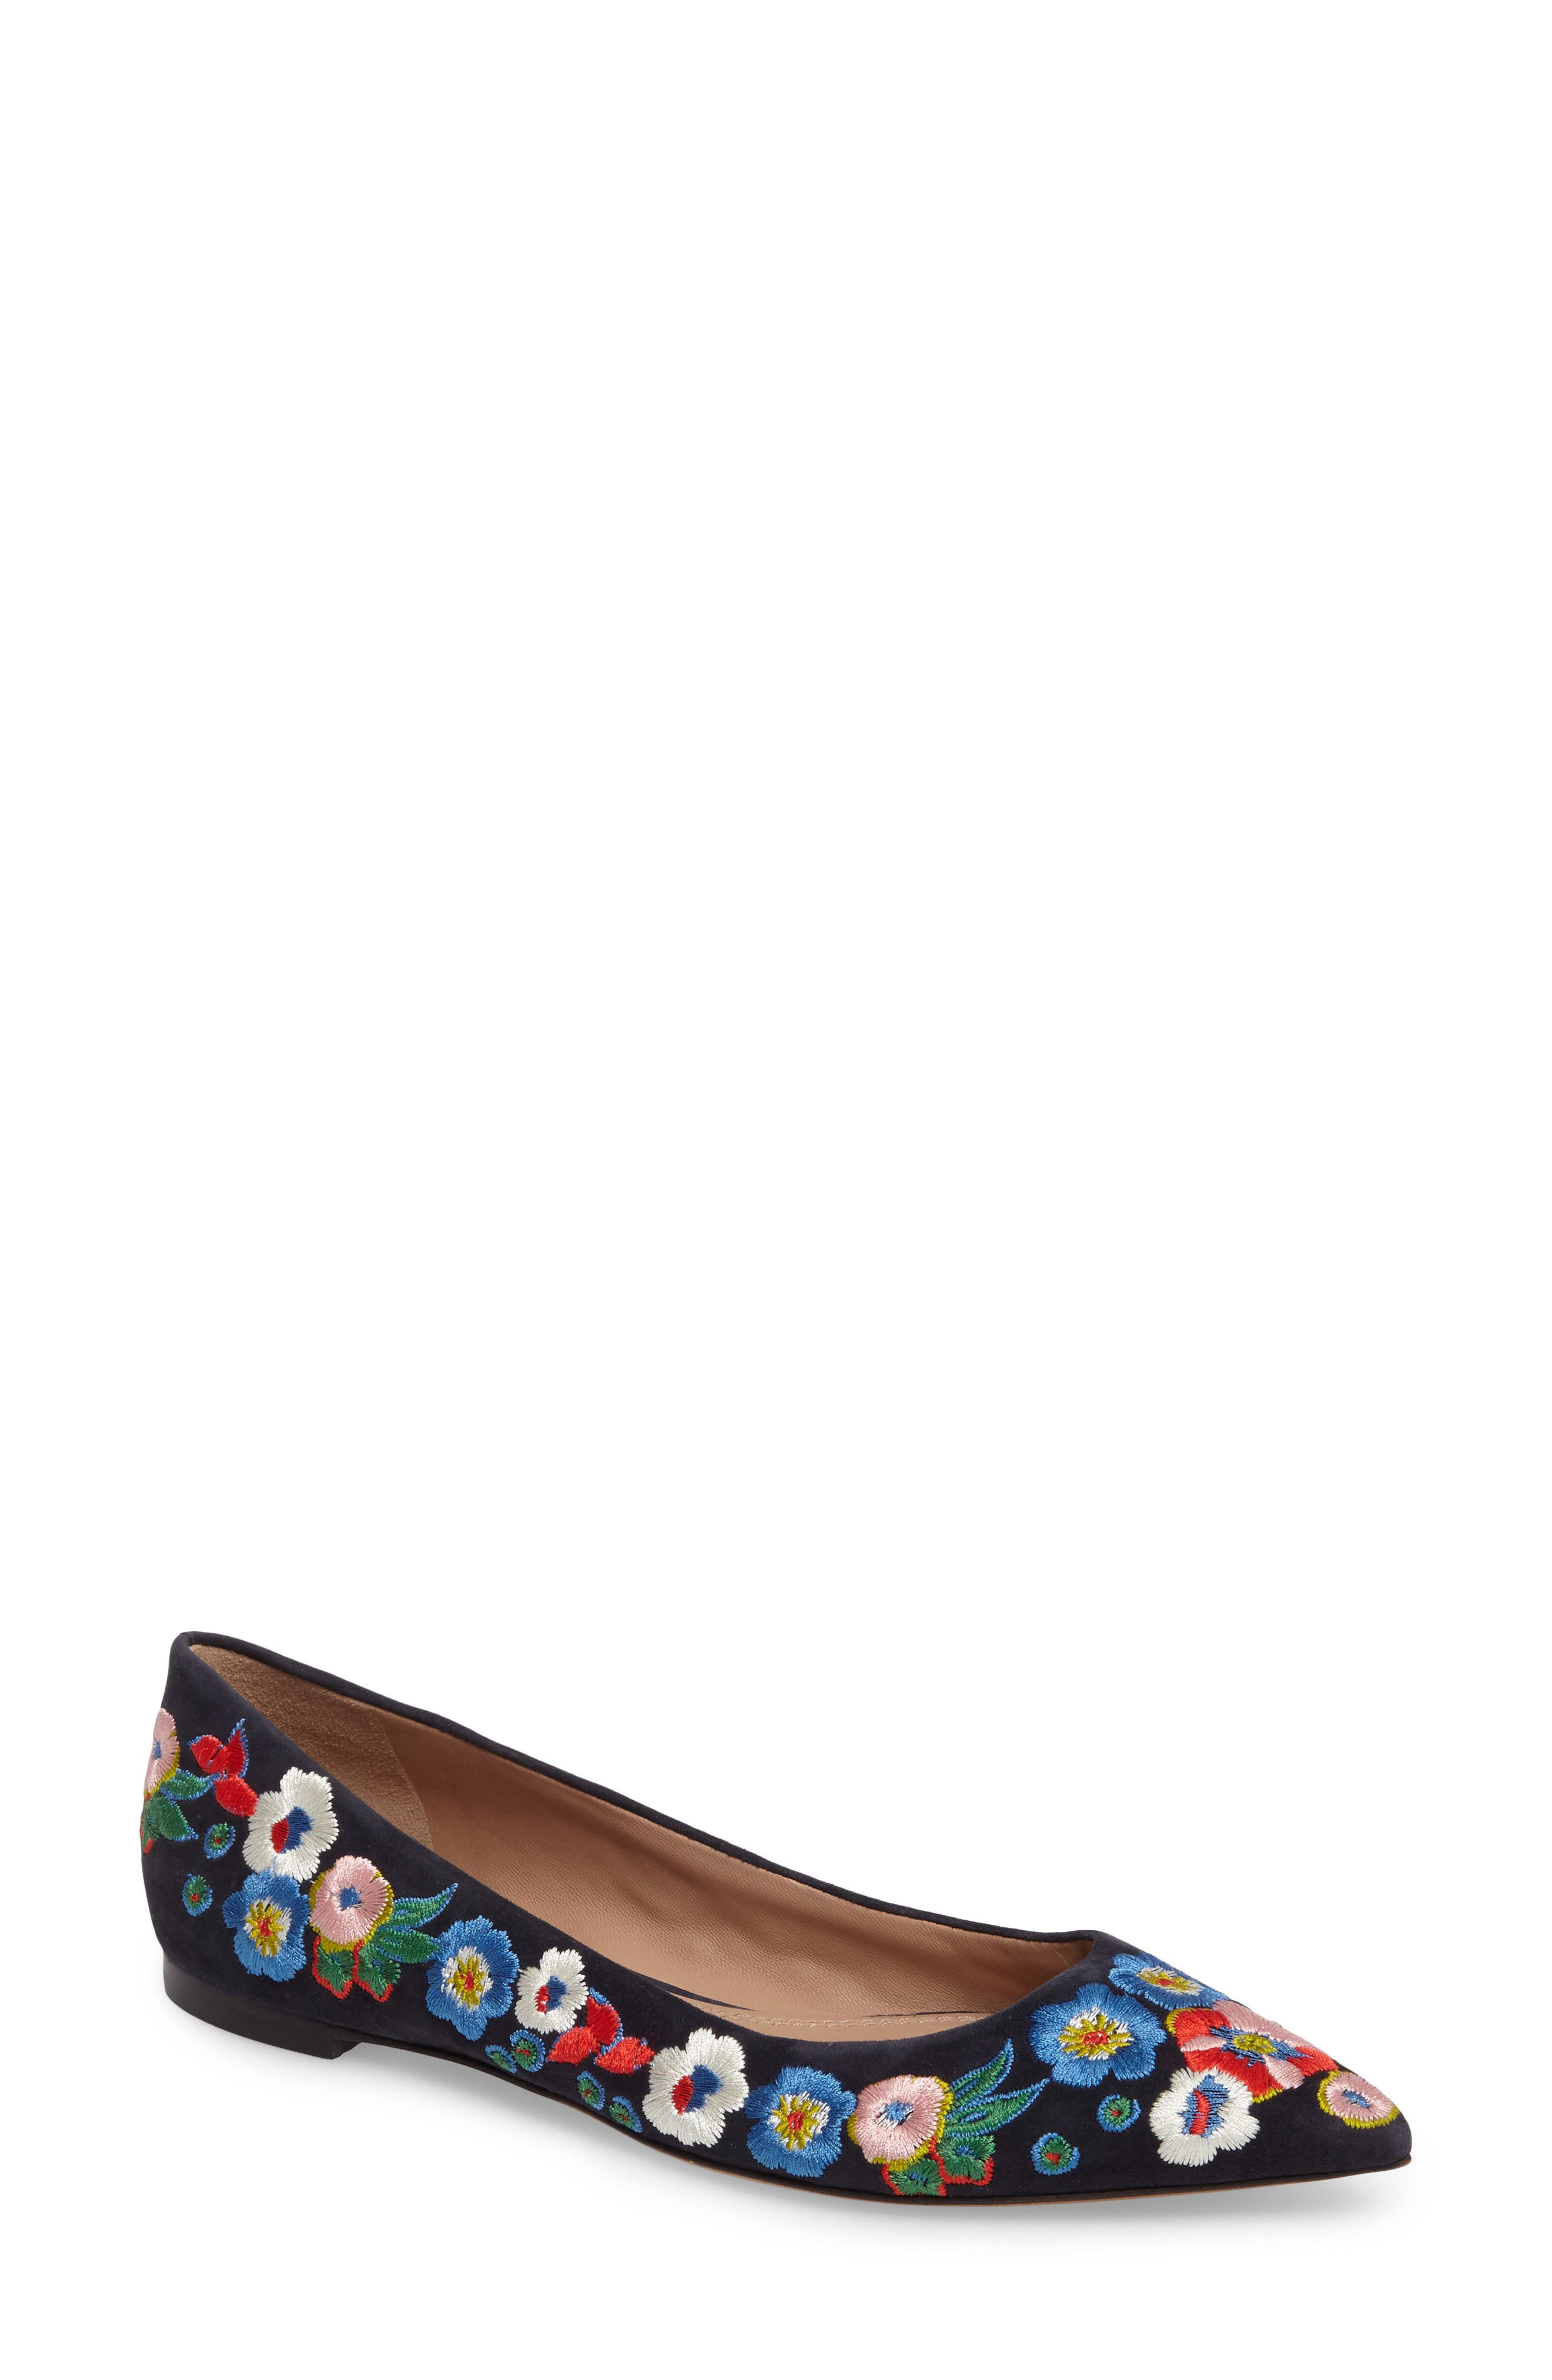 tory burch flower shoes